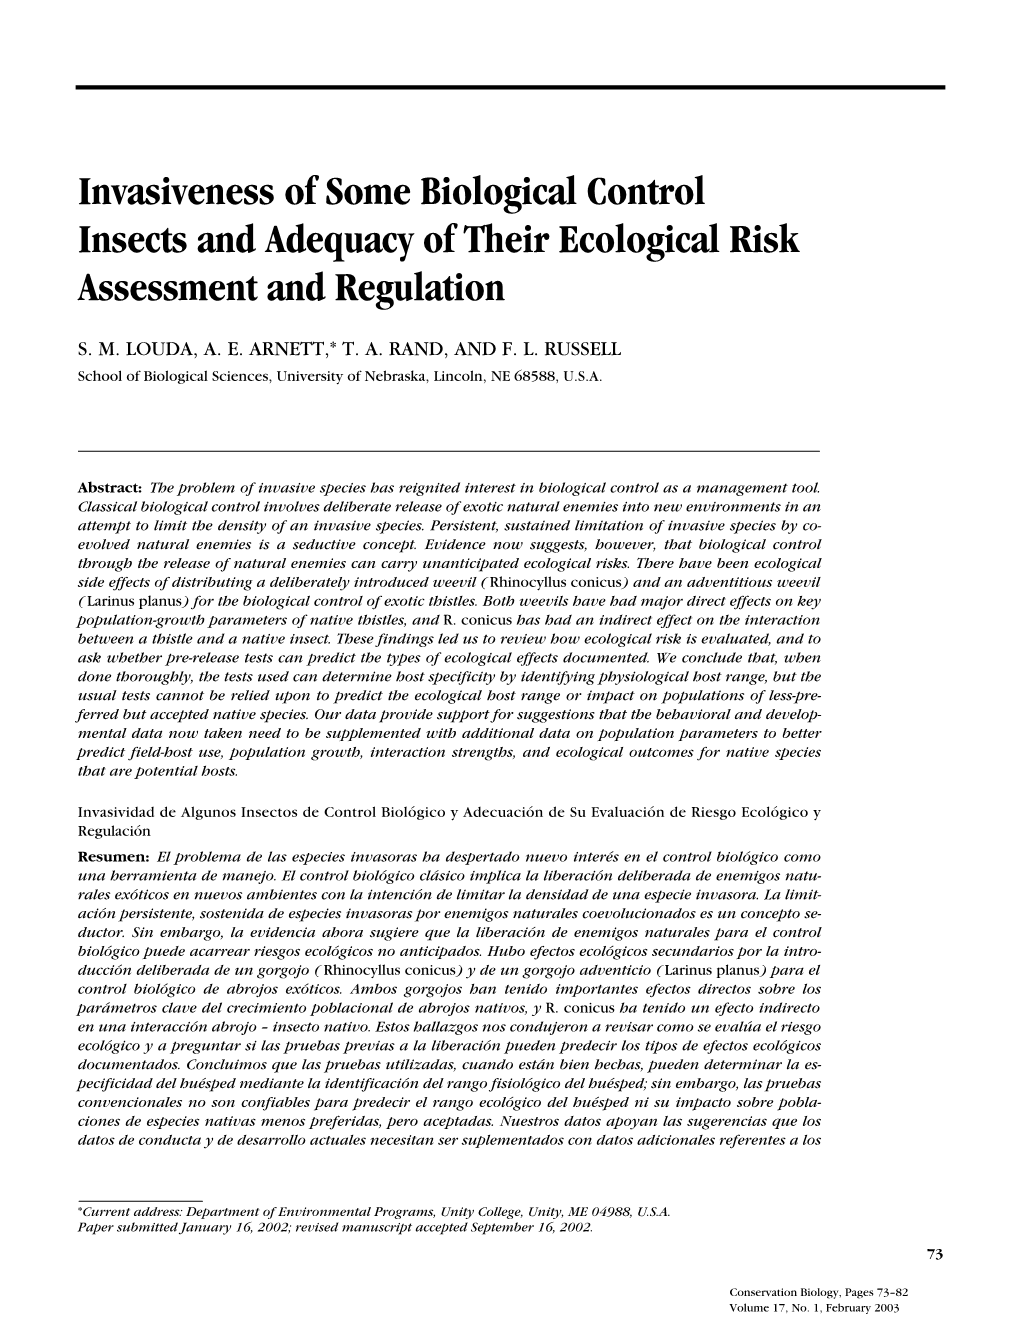 Invasiveness of Some Biological Control Insects and Adequacy of Their Ecological Risk Assessment and Regulation